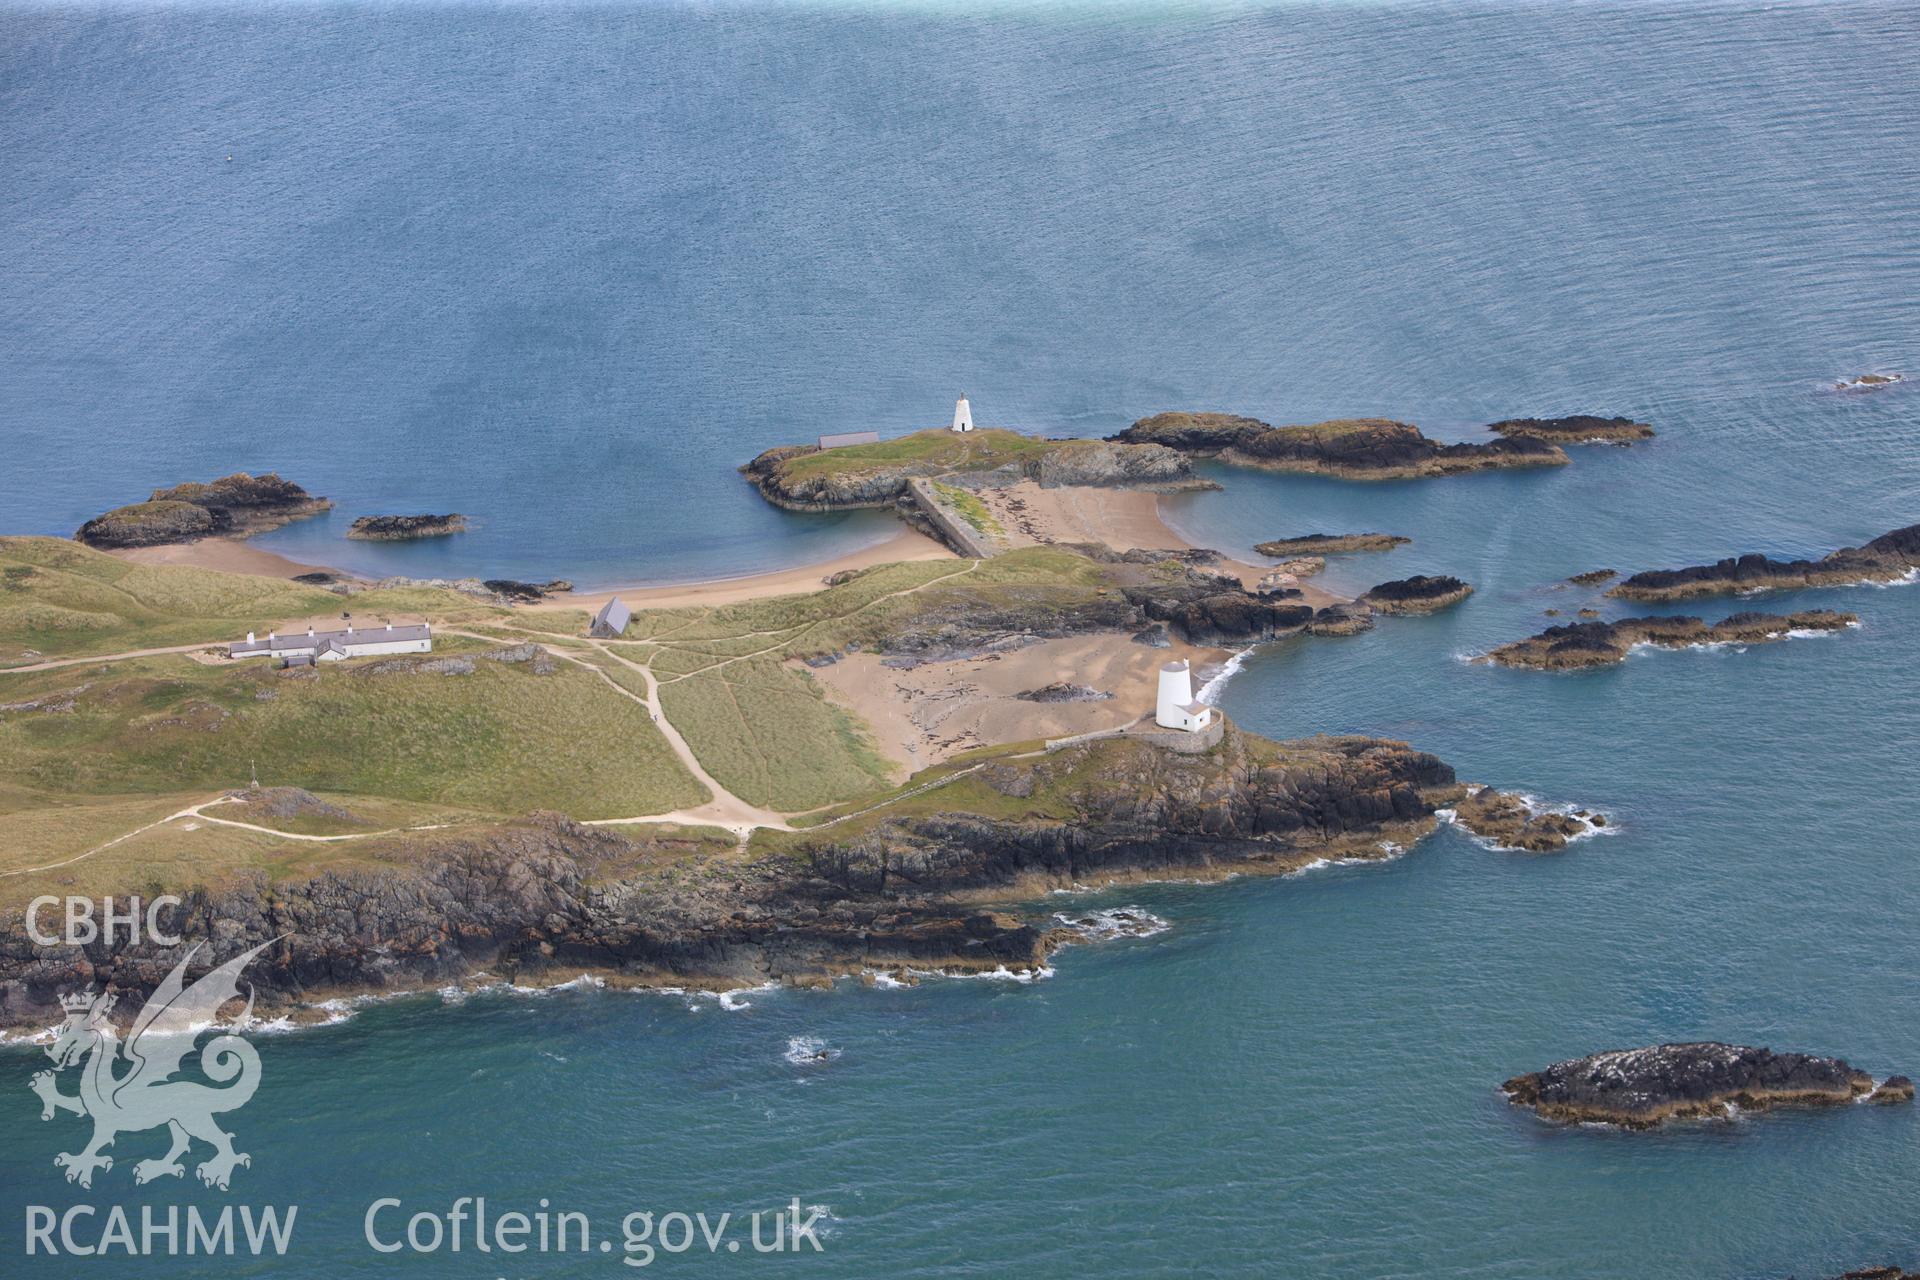 RCAHMW colour oblique photograph of Llanddwyn Island and lighthouse,. Taken by Toby Driver on 20/07/2011.